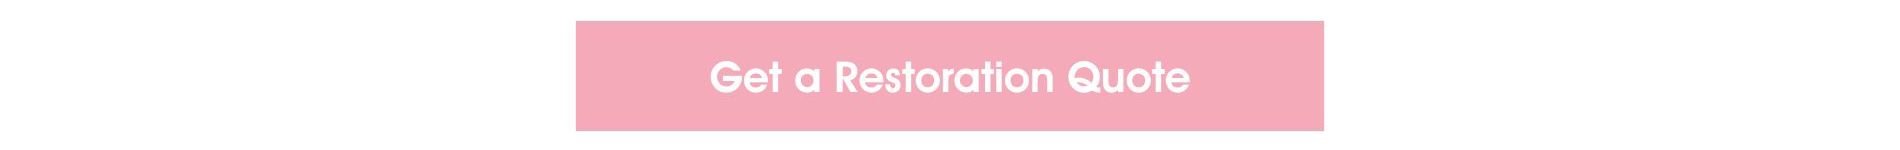 get your free restoration quote from the handbag clinic 